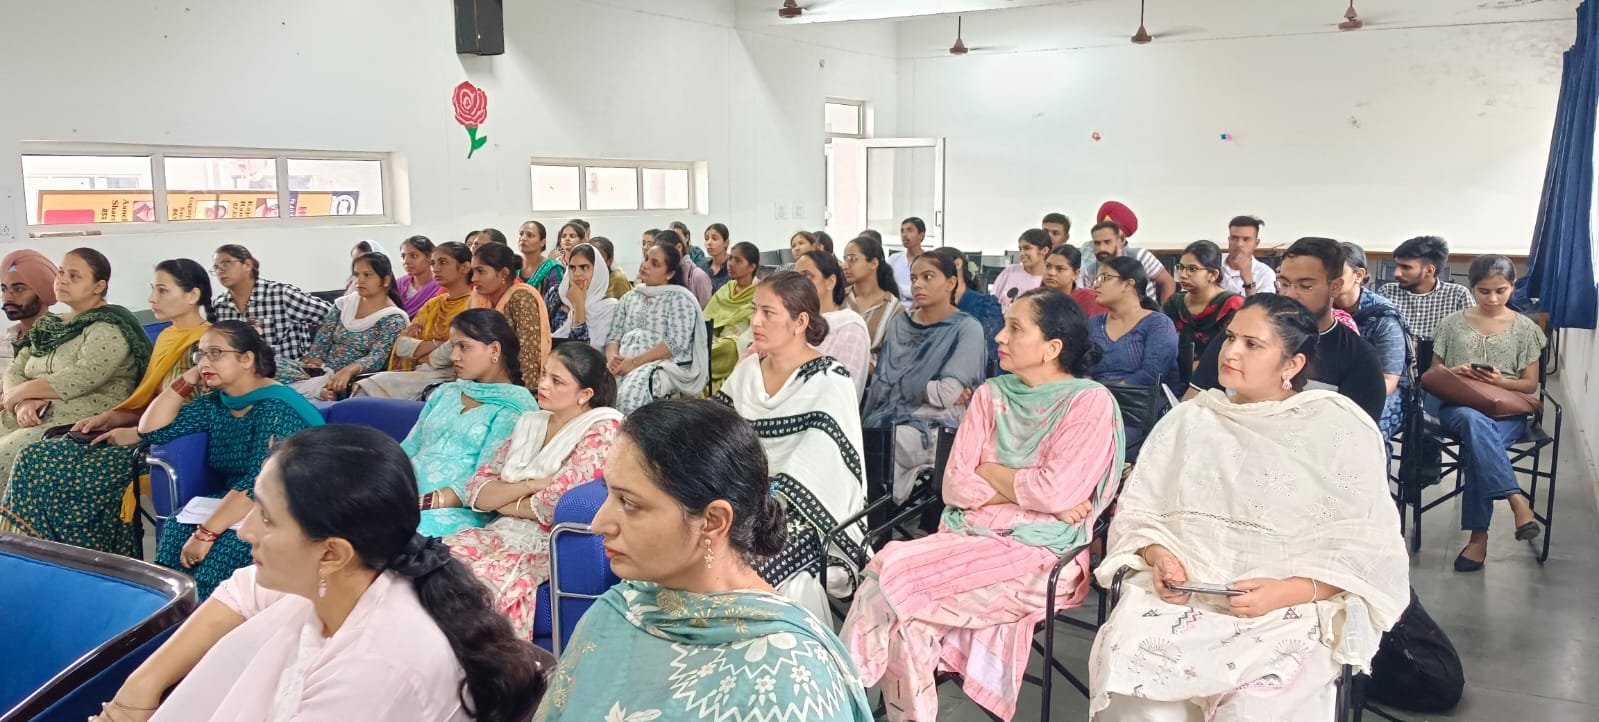 13th Seminar on Cyber Women Safety at Saint Kabir college of education, Patiala.